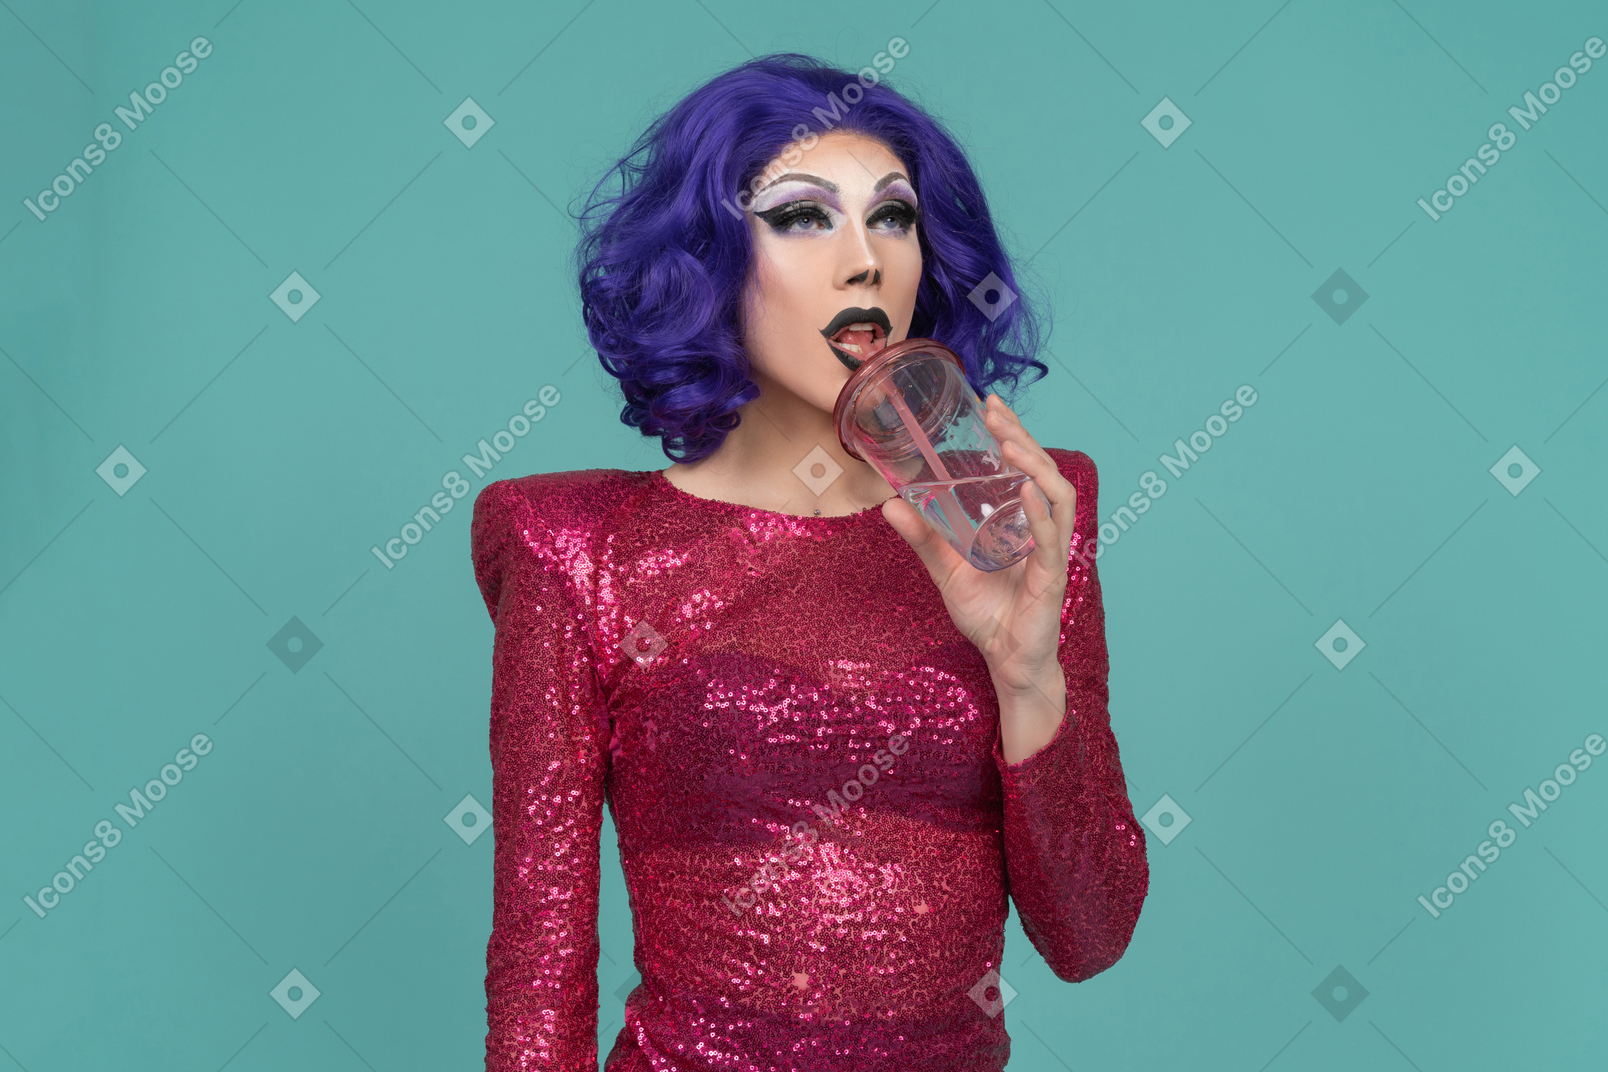 Drag queen in pink sequin dress having a drink from plastic cup